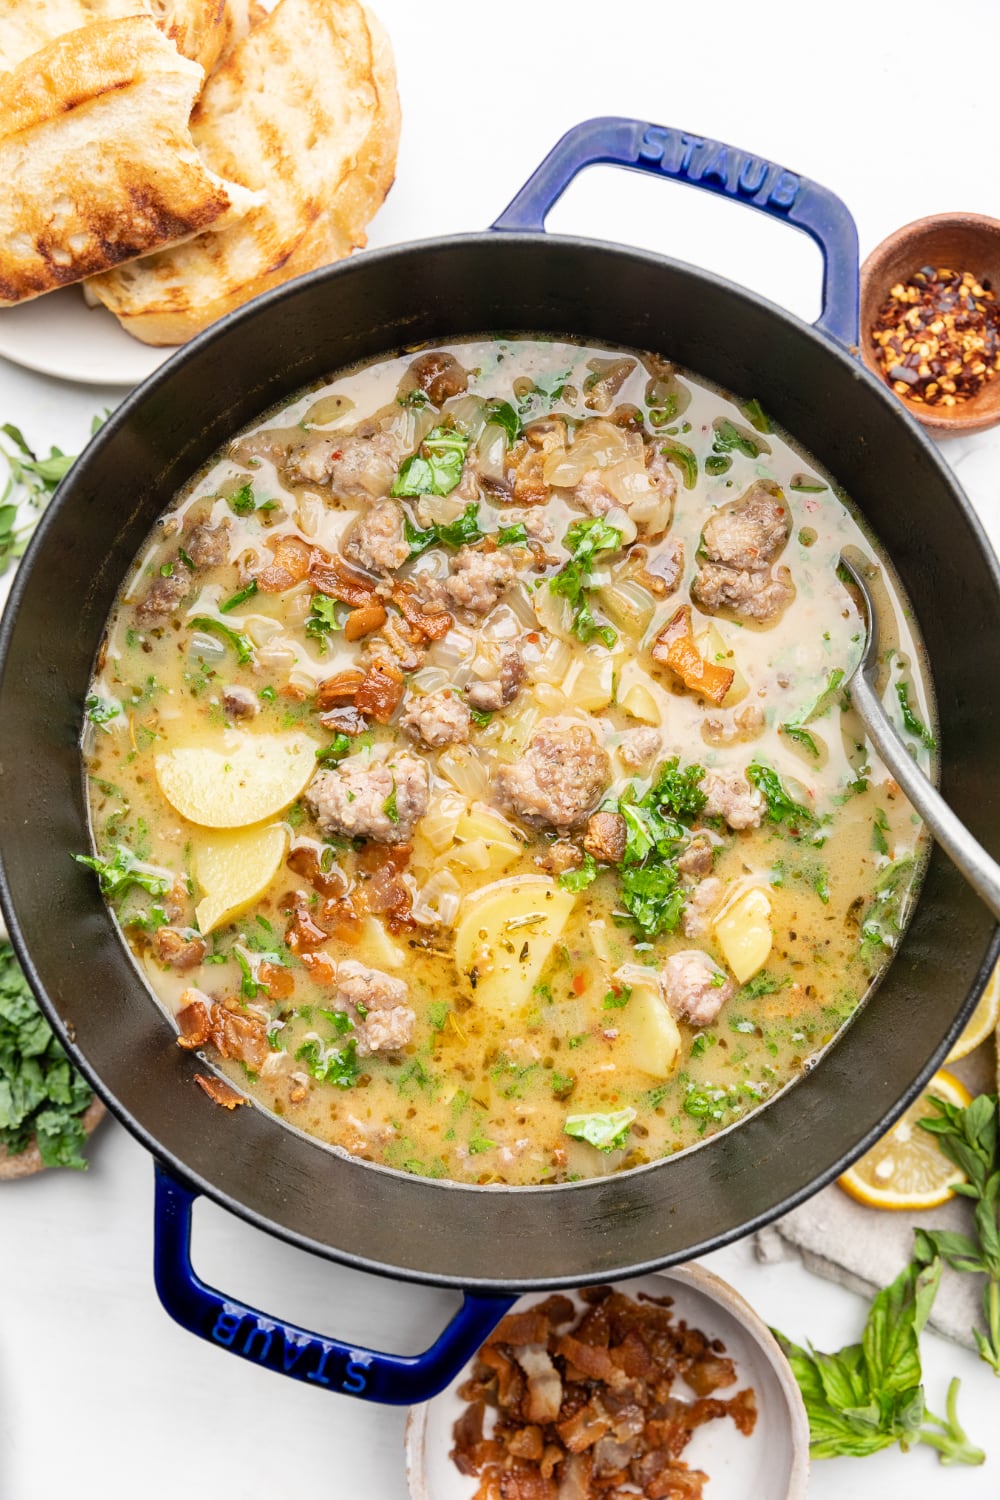 Large stockpot with healthy zuppa toscana soup and a spoon